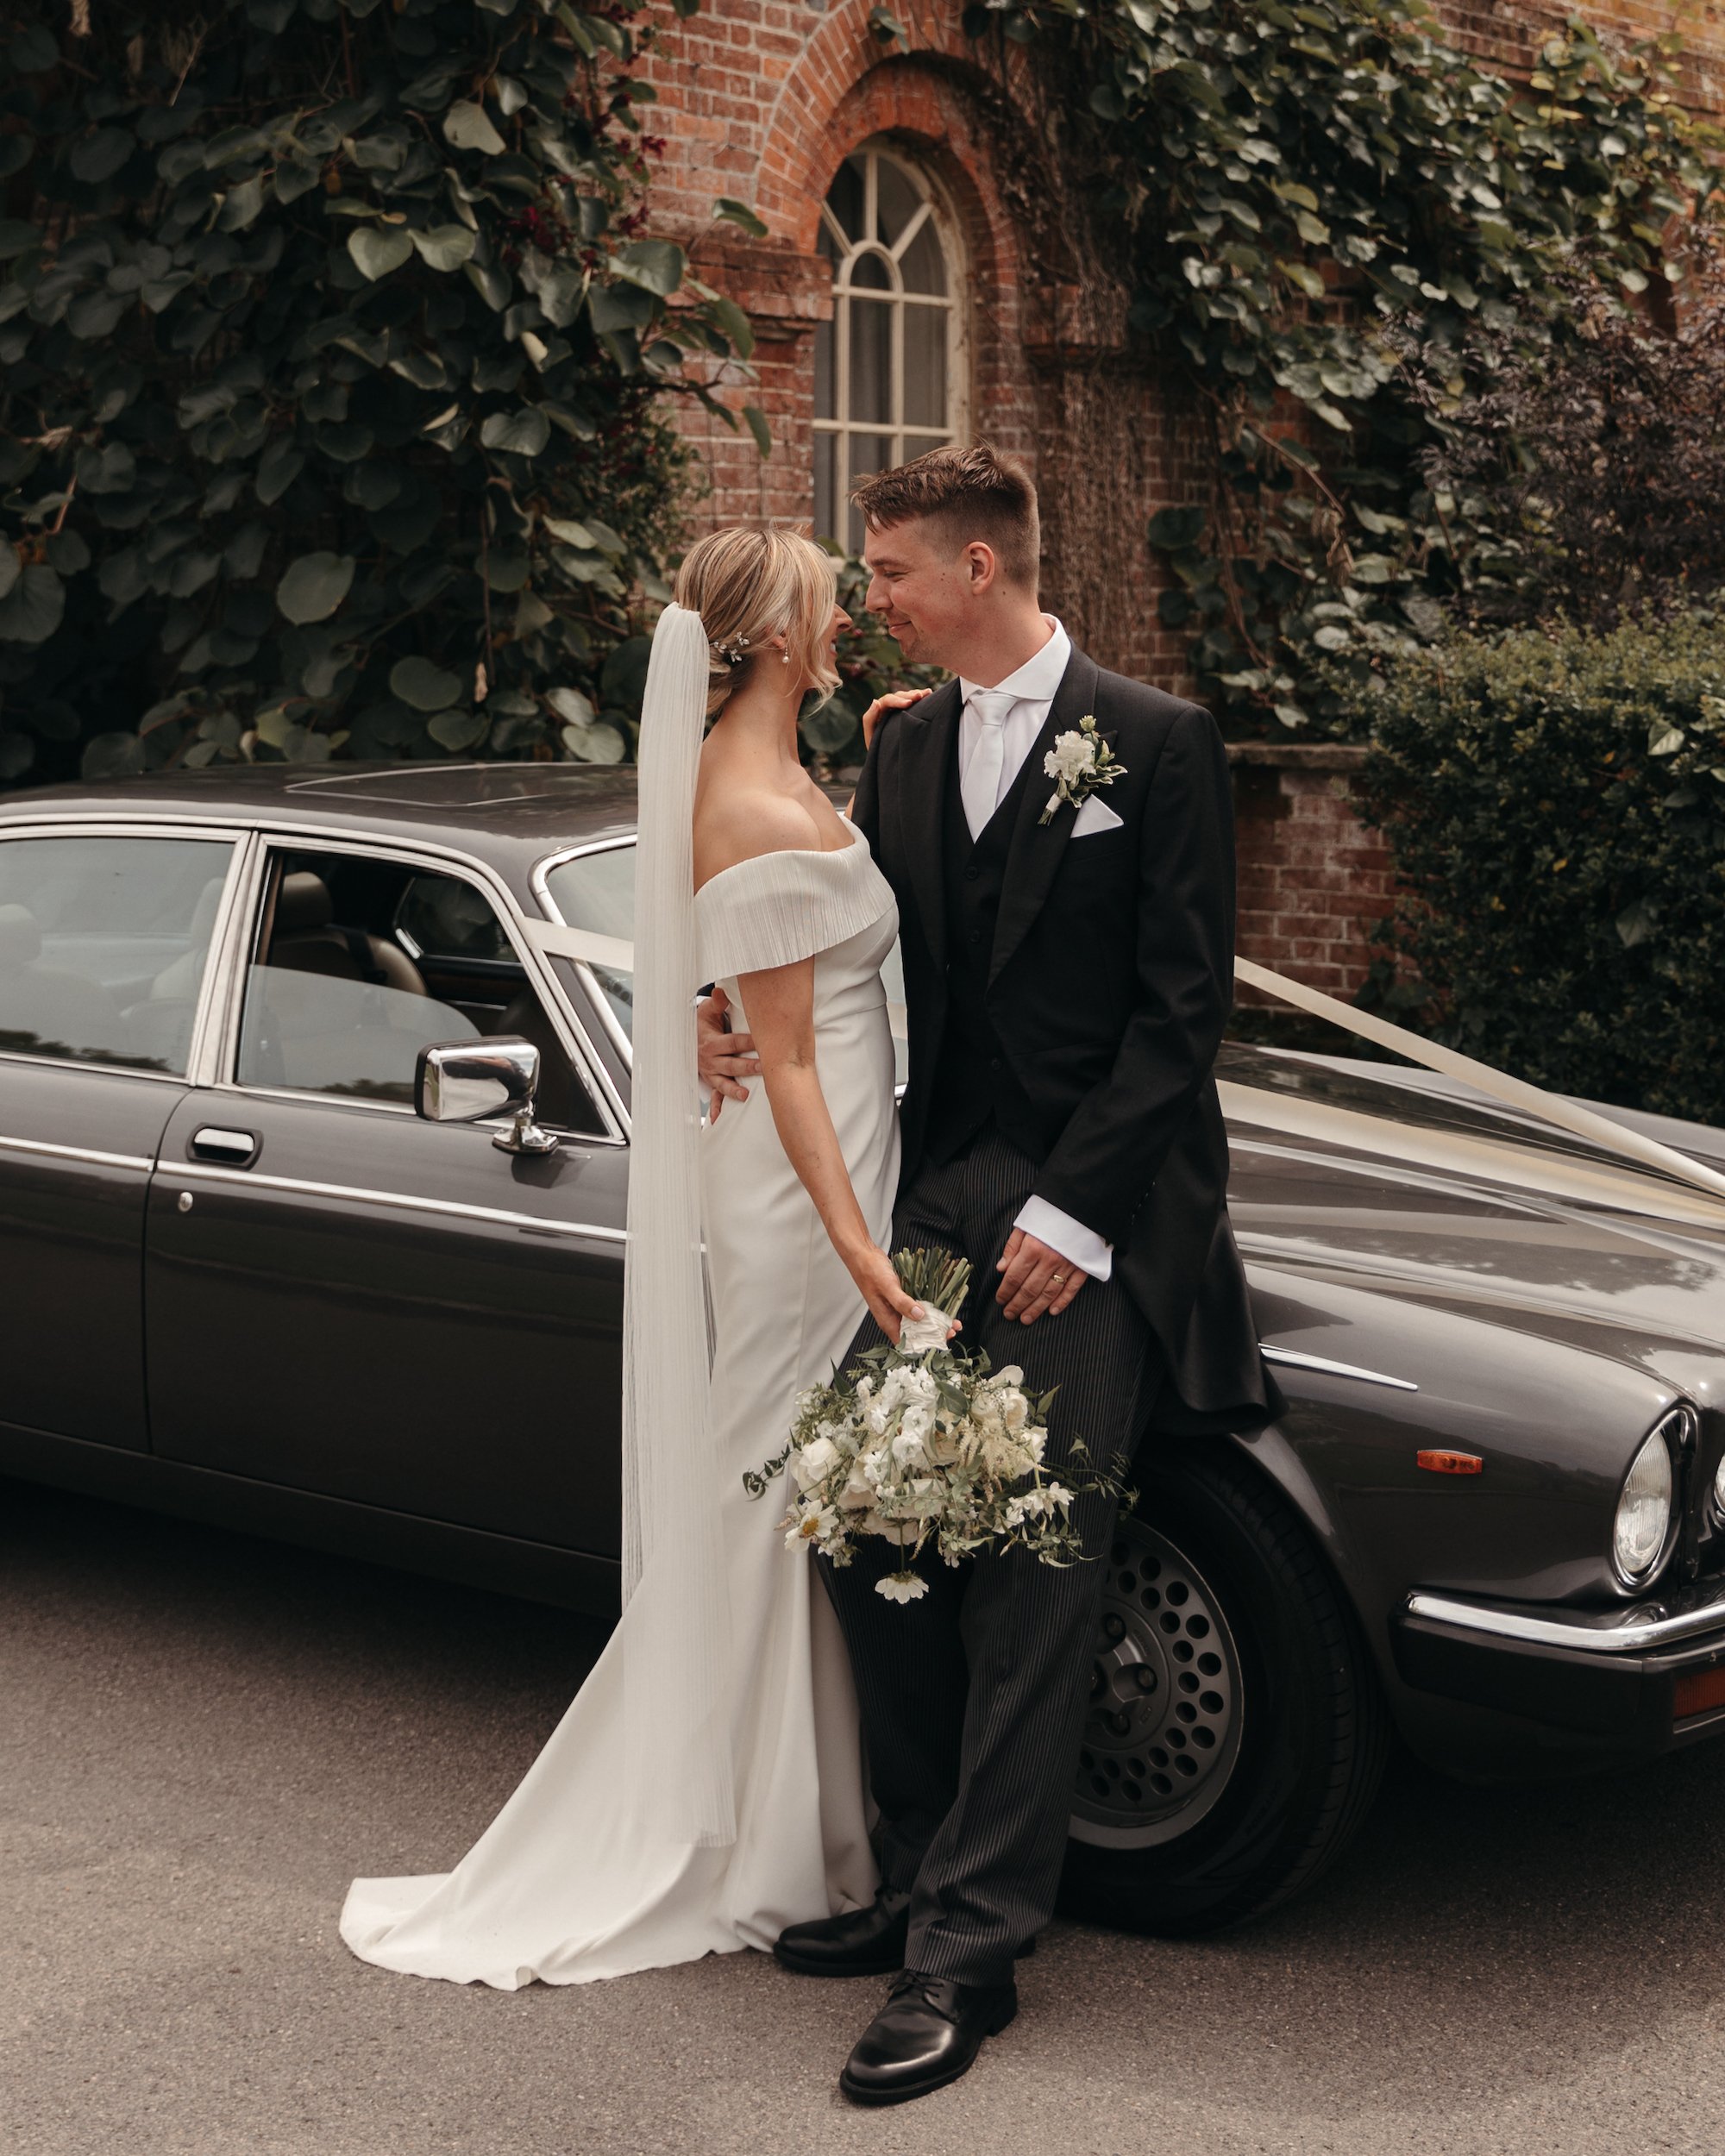 Beautiful Lucy wears the Harbour frill dress for her wedding day | Wedding dresses by Halfpenny London